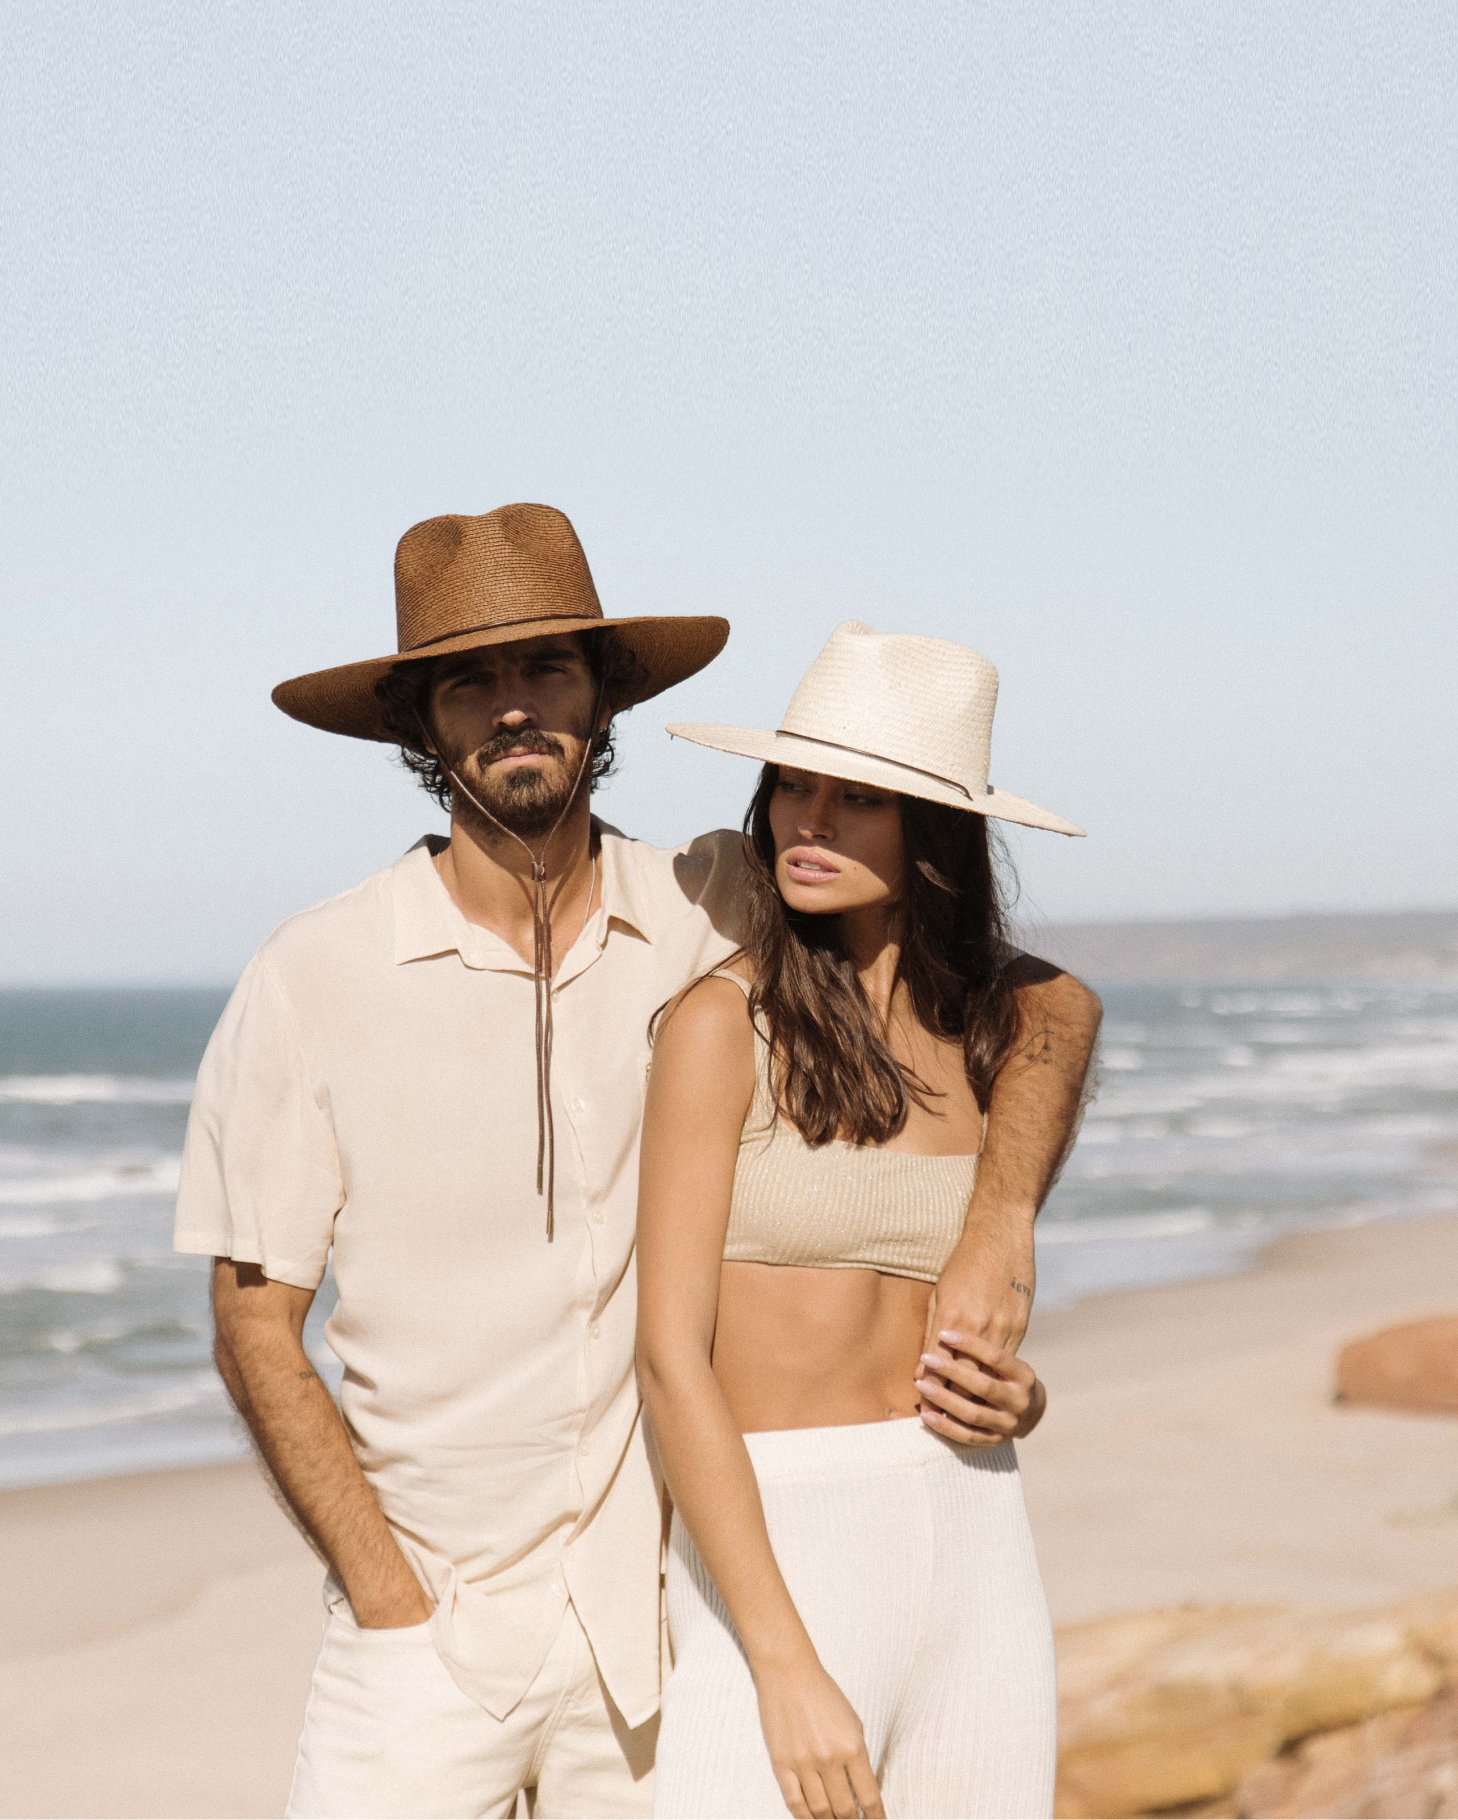 Will Bear ethical Straw Hats